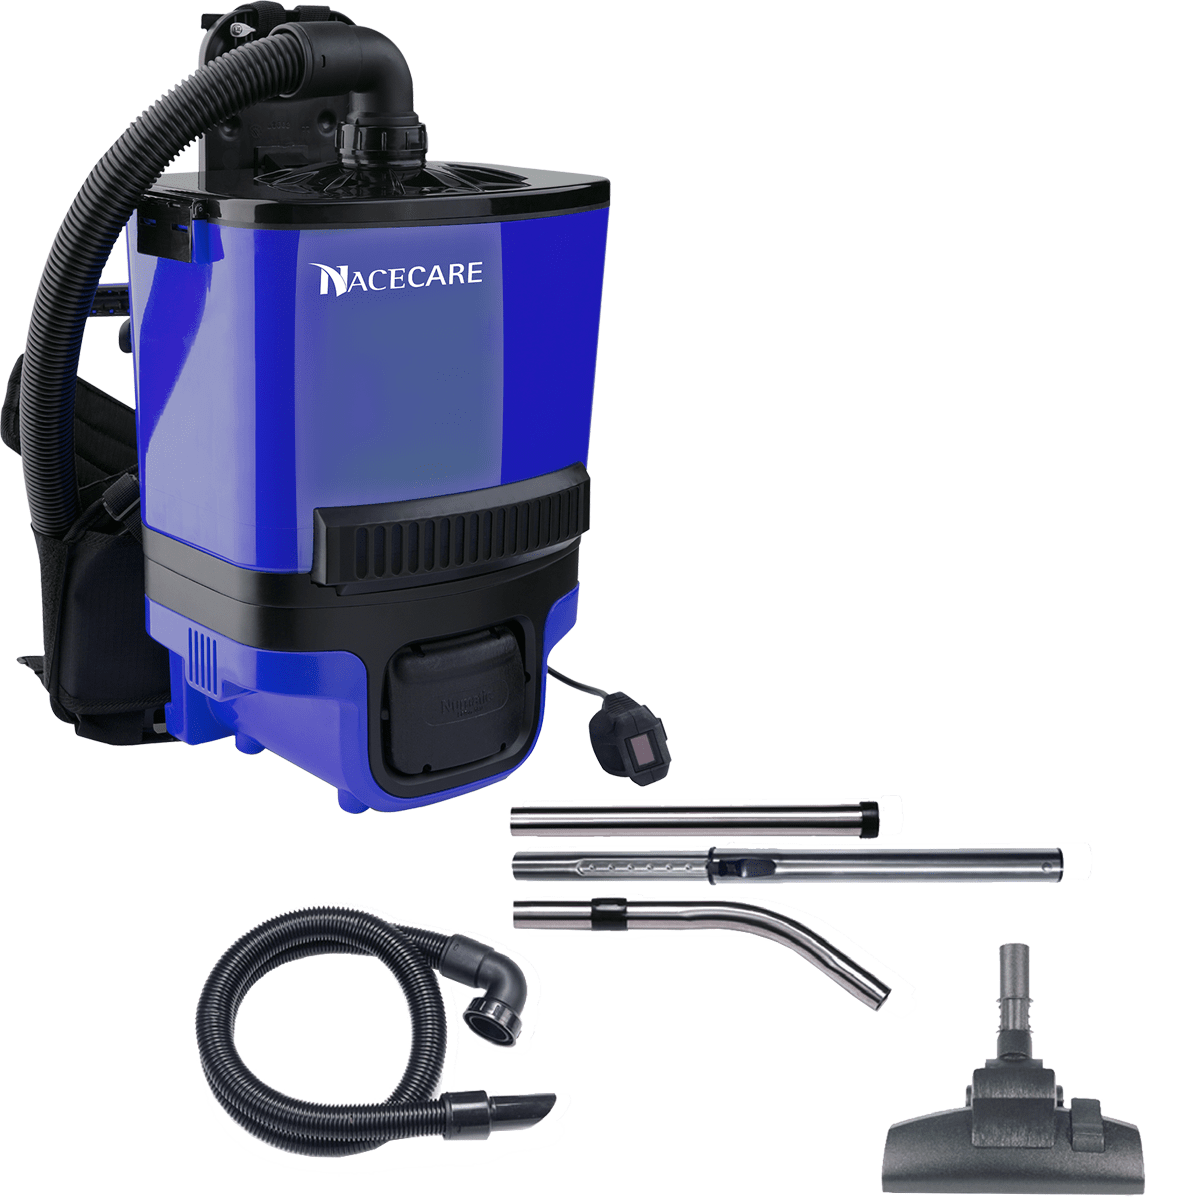 Nacecare Rbv 130 Backpack Vacuum With Performance Kit - Astb7